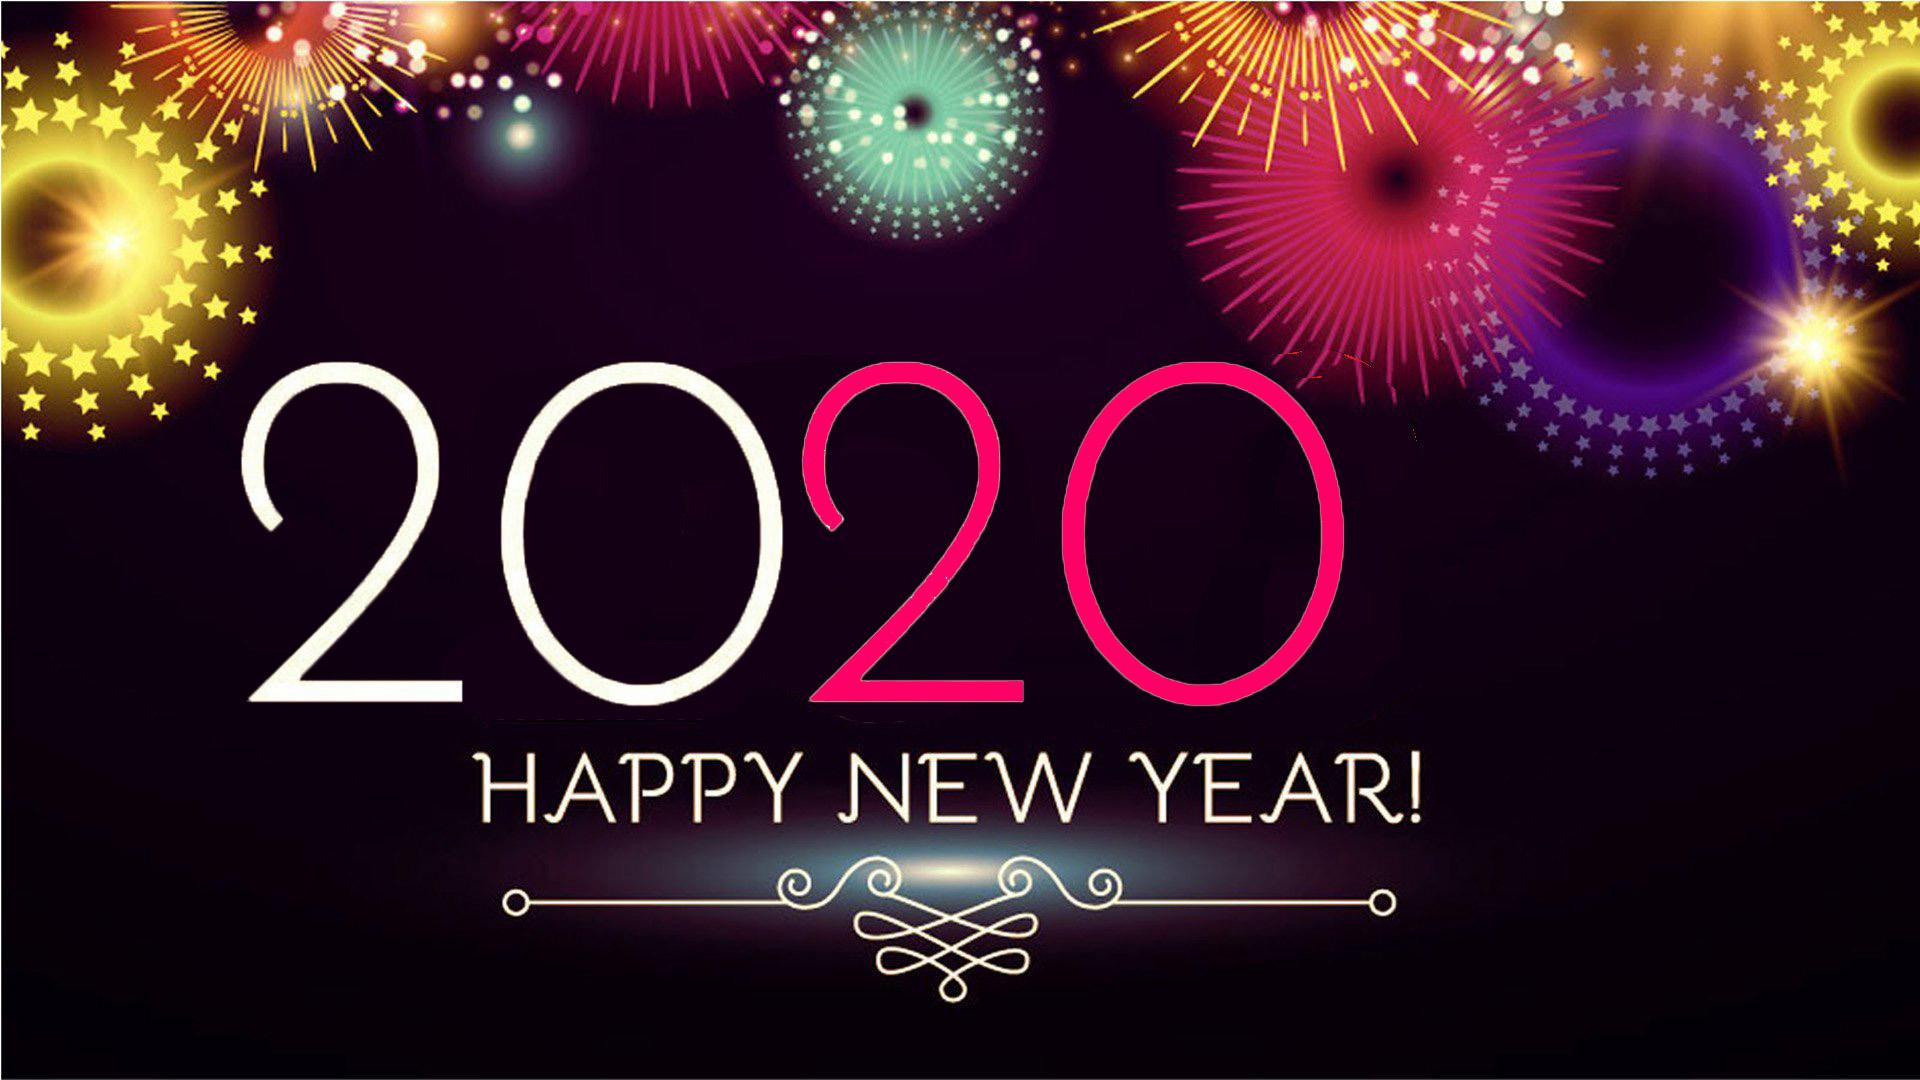 Happy New Year 2020 Wishes Greetings Sms Messaging With